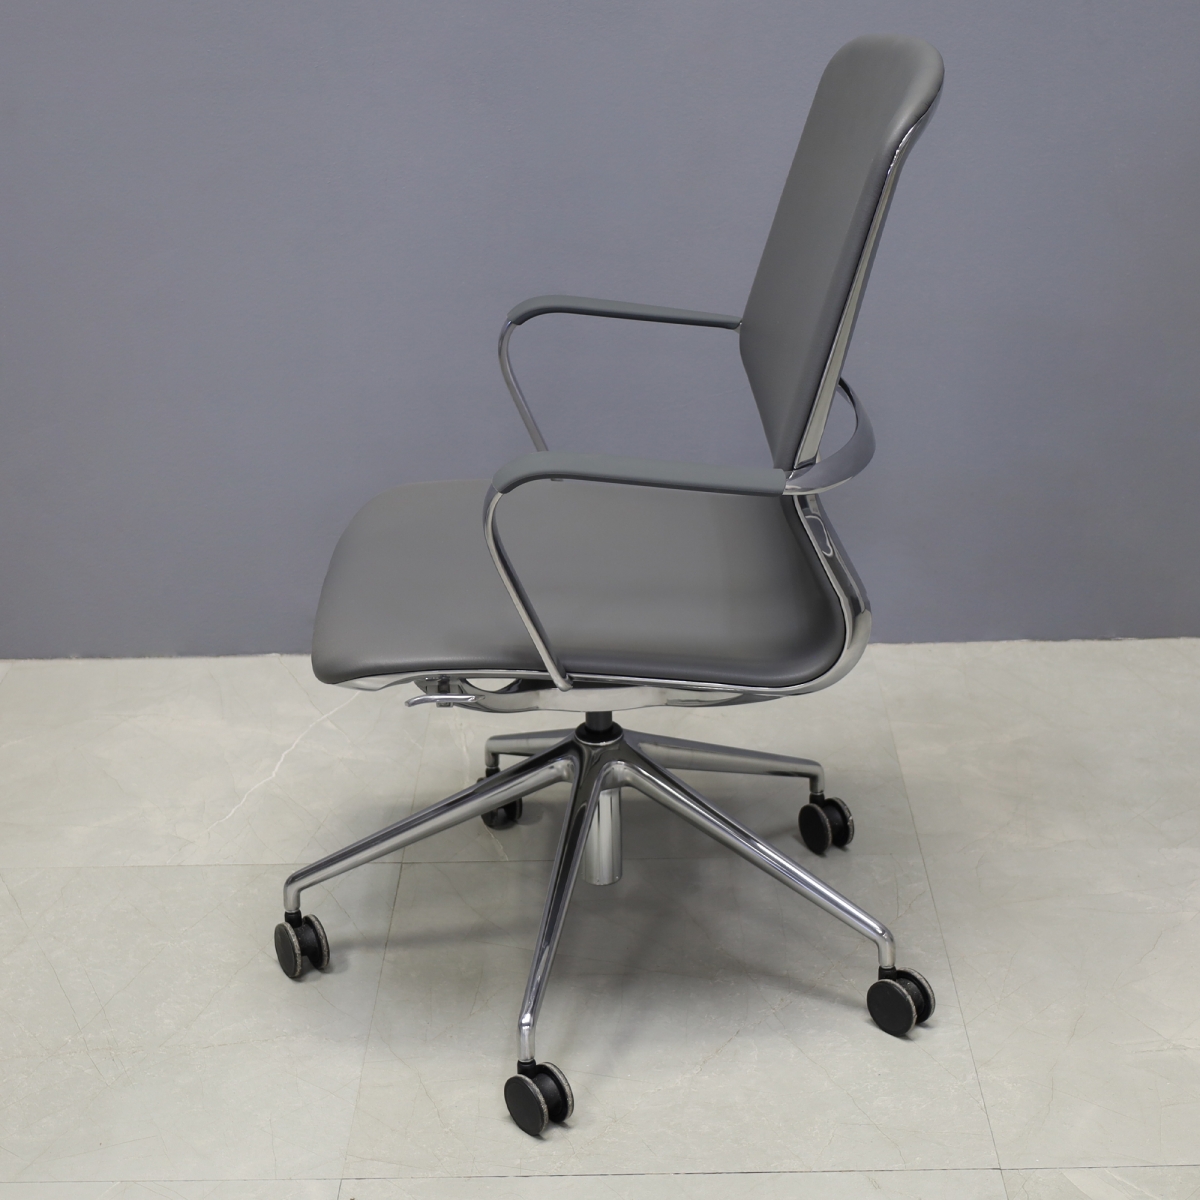 Arpina Conference and Meeting Room Chair